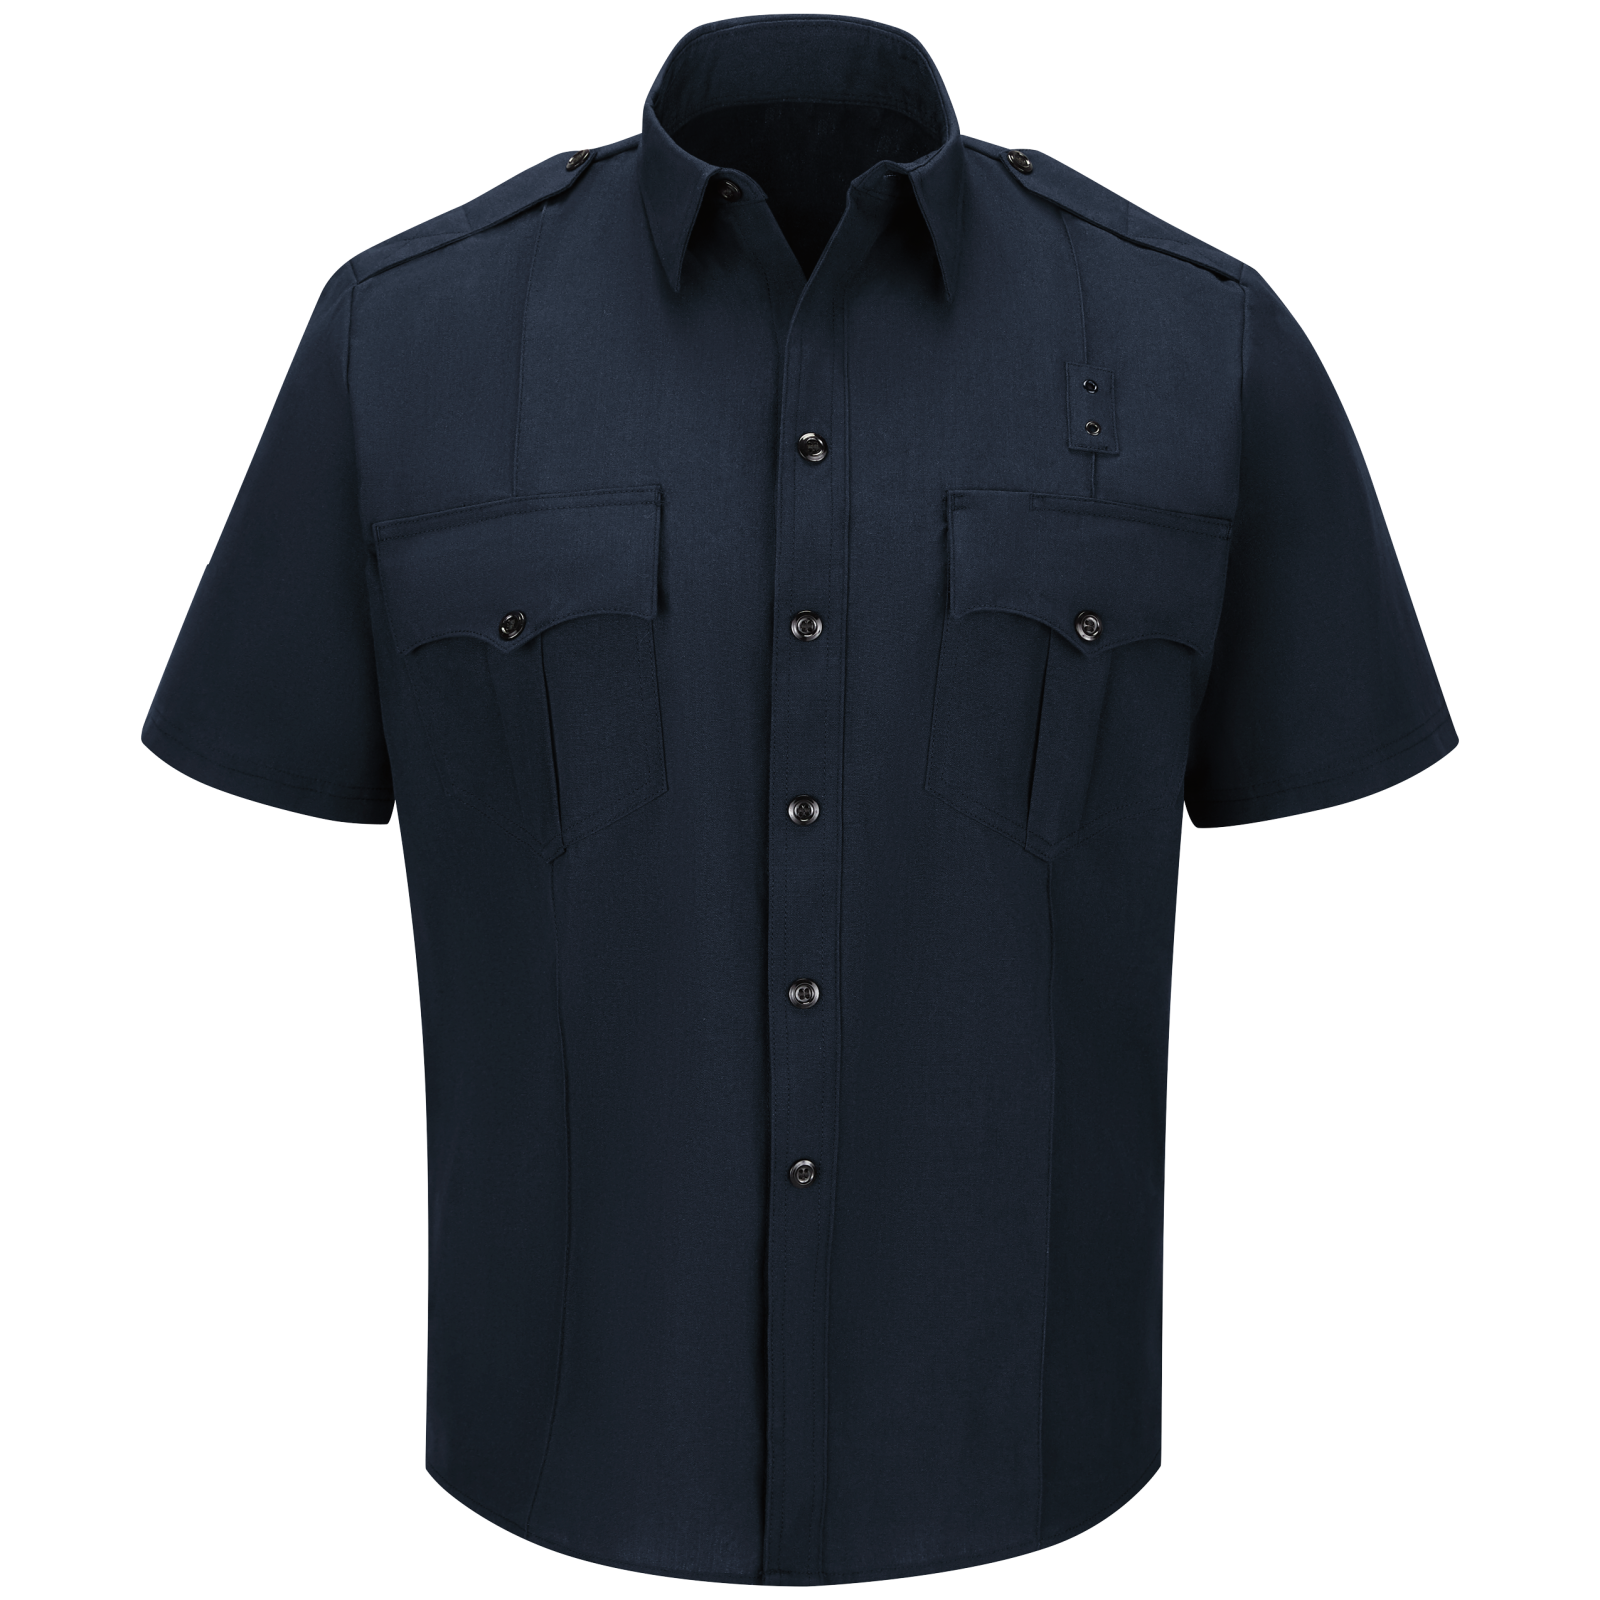 Workrite Men's Classic Long Sleeve Fire Officer Shirt (FSE0) |  The Fire Center | Fuego Fire Center | Store | FIREFIGHTER GEAR | FREE SHIPPING | Made with durable, flame-resistant Nomex® IIIA fabric and autoclaved with our proprietary PerfectPress® process to give you a professional appearance that lasts. Featuring details like lined, banded collars and reinforced stitching, designed to support your needs.